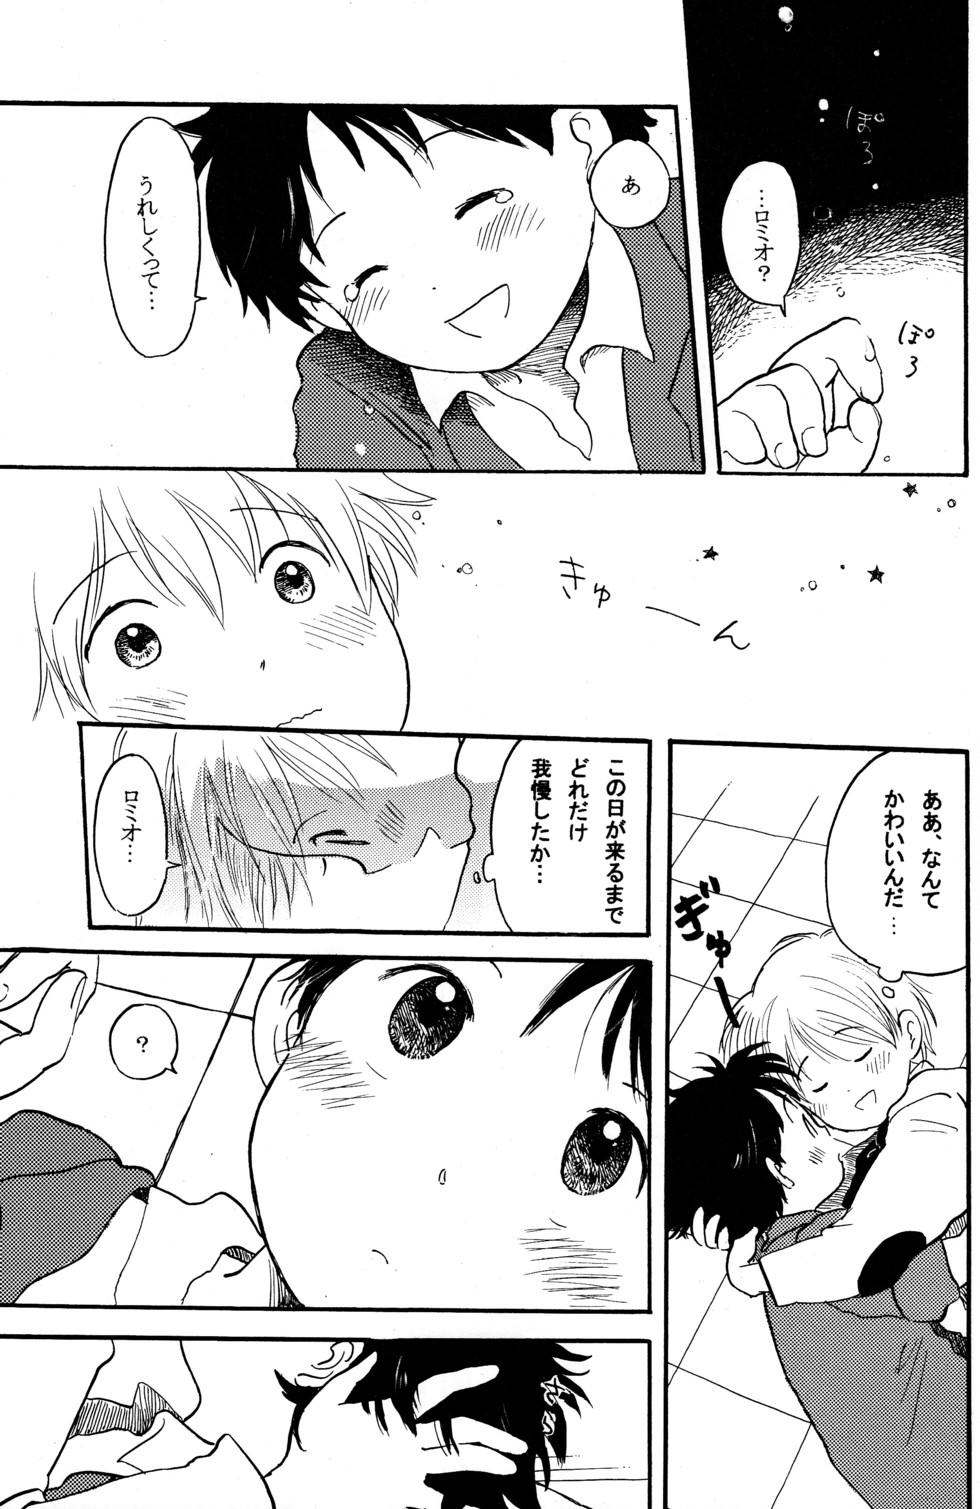 Cheating Shota Romi! - World masterpiece theater Romeos blue skies Best Blowjobs Ever - Page 7